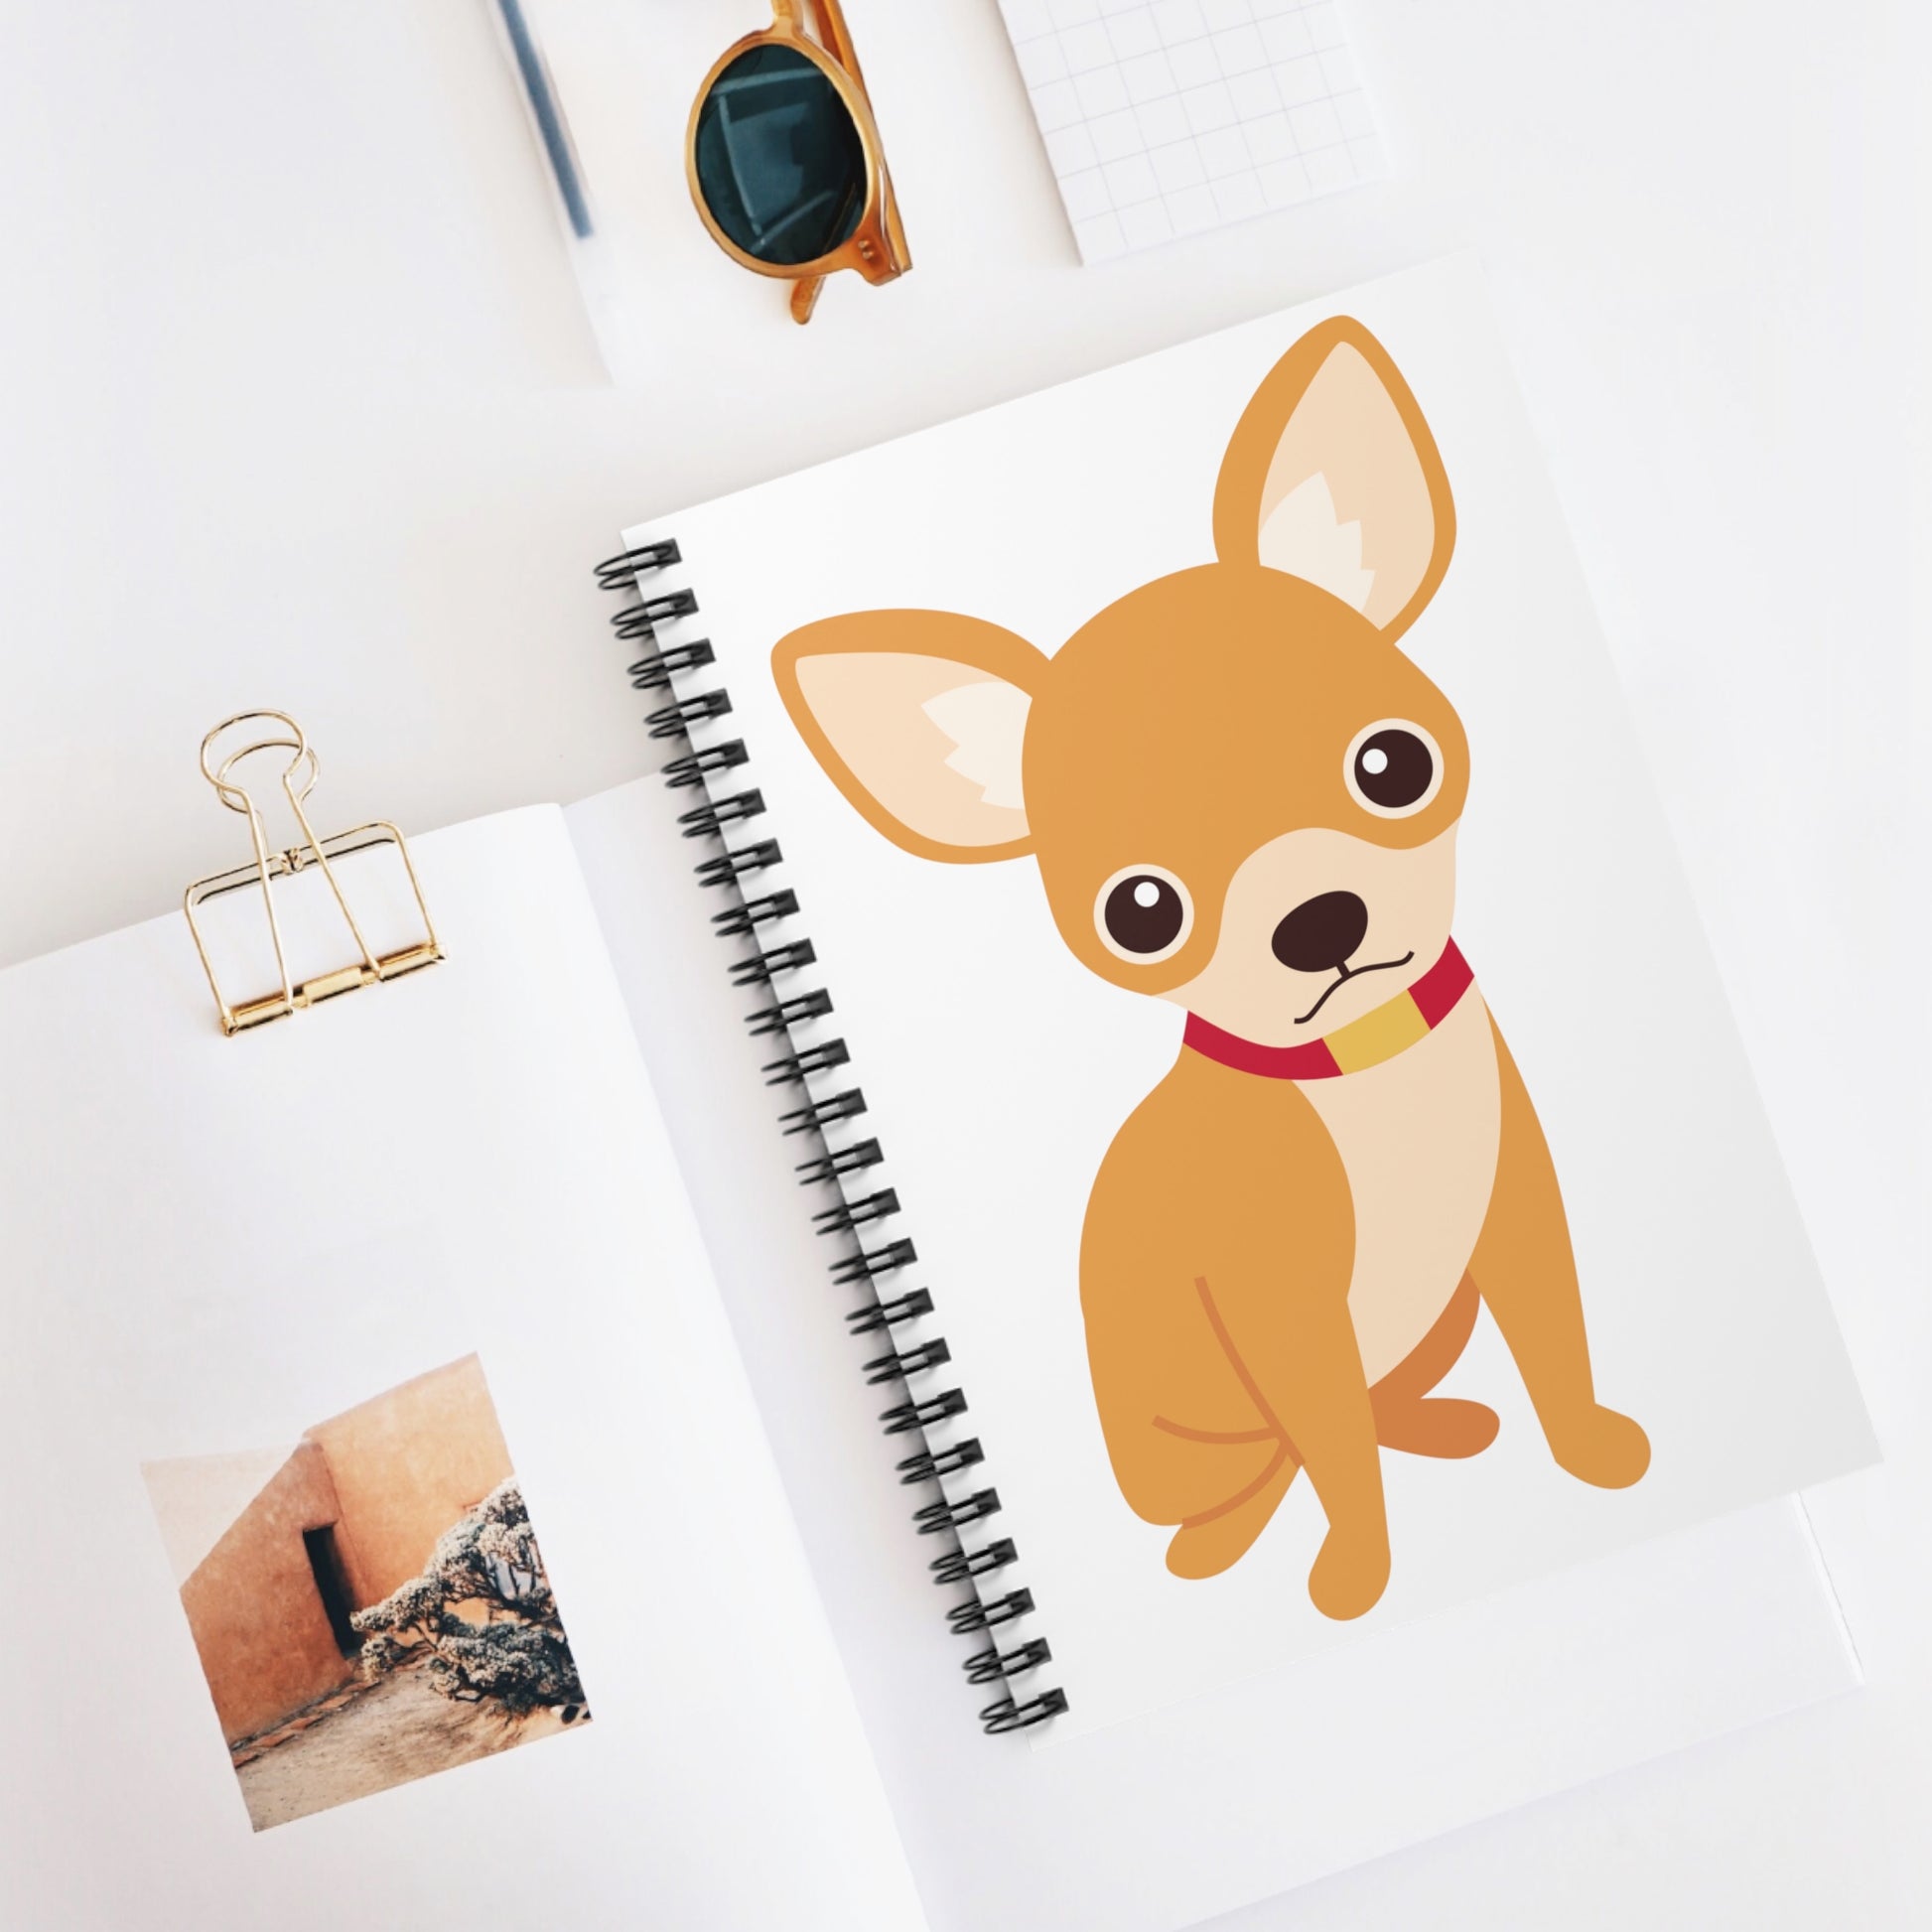 Sad Chihuahua: Spiral Notebook - Log Books - Journals - Diaries - and More Custom Printed by TheGlassyLass